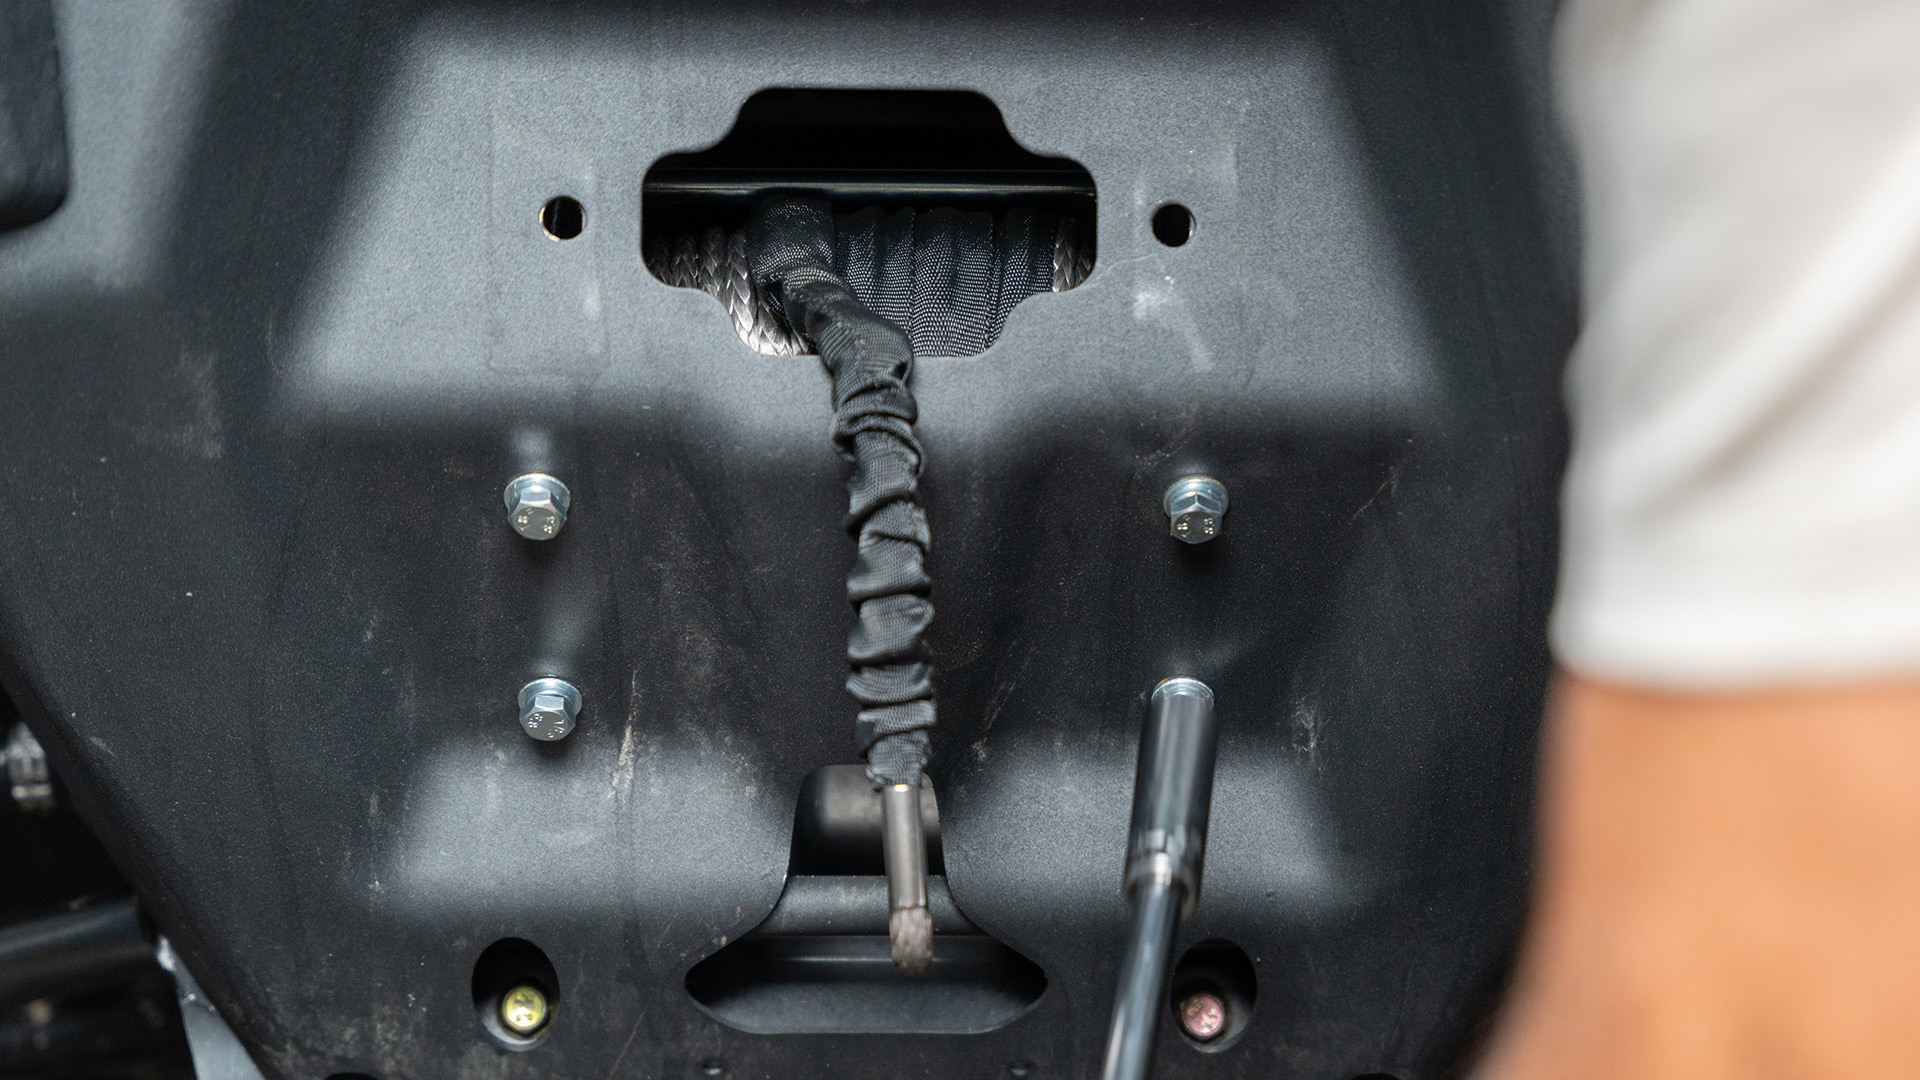 How to install a winch on your Can-Am SxS?